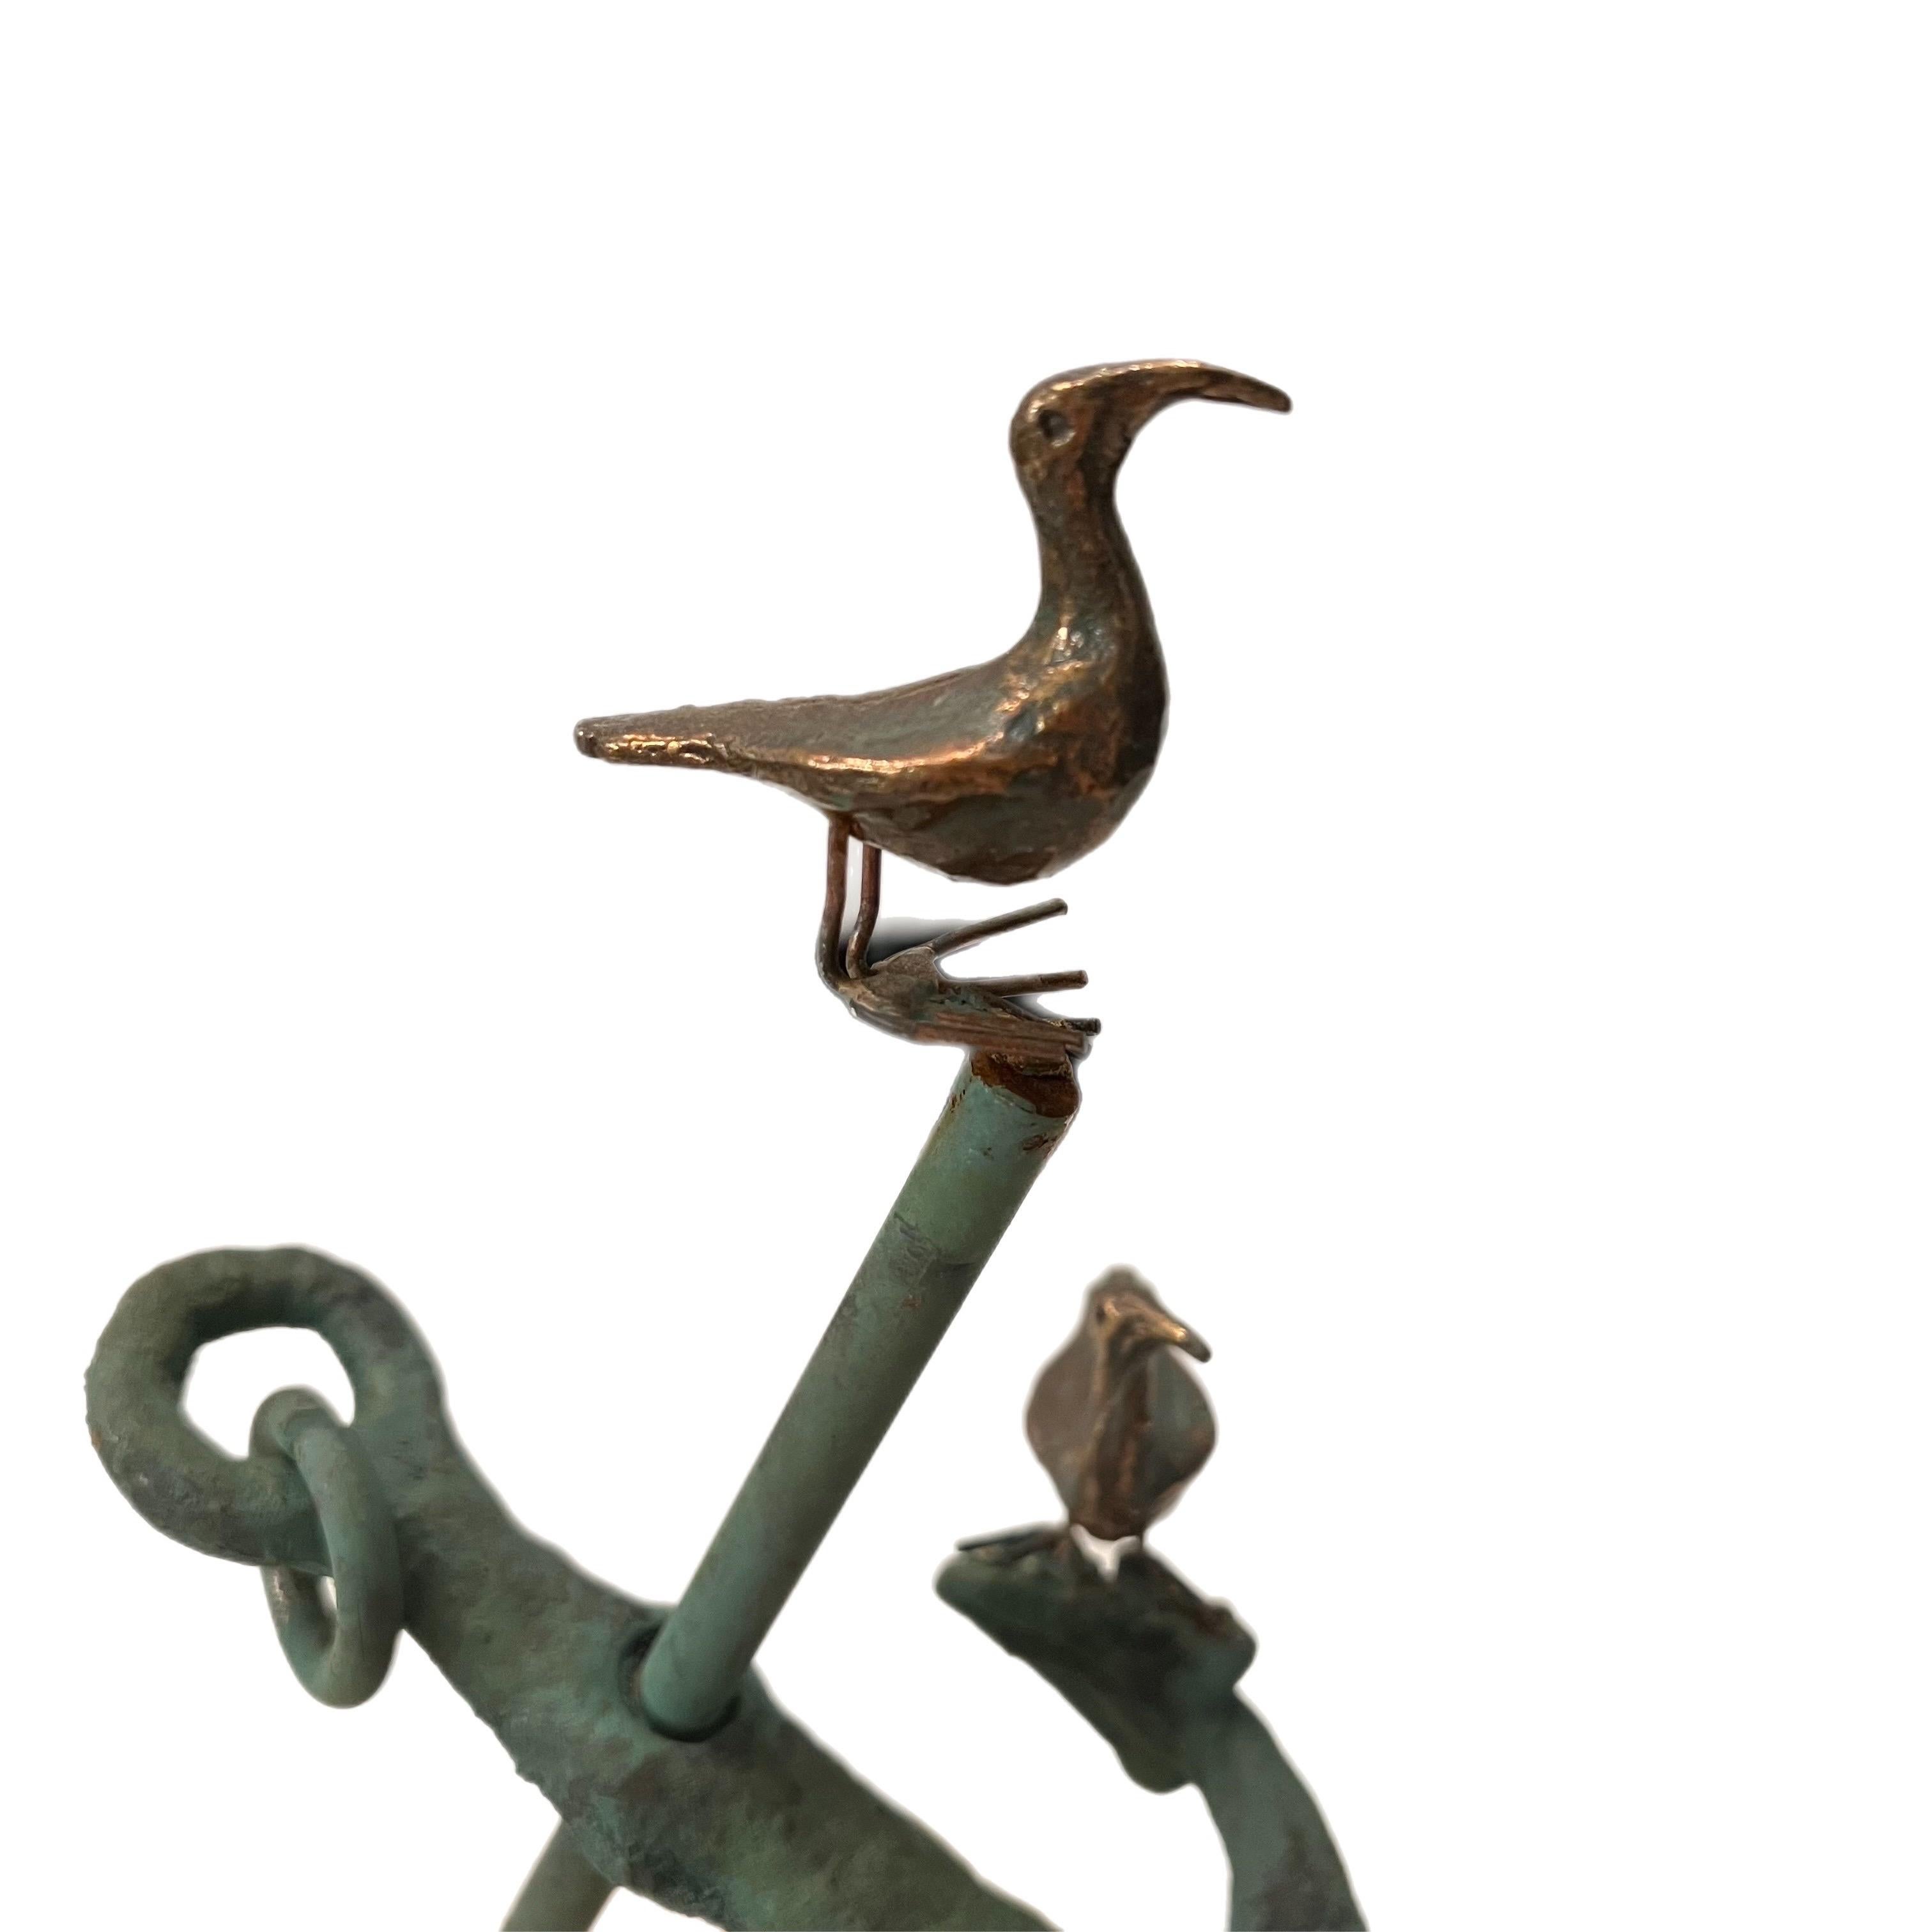 Mixed metals make this coastal mid-Century sculpture of an anchor with 2 sea birds perched atop.  The anchor comes off and can be repositioned to your liking.   The base of the sculpture is made of pink marble, unpolished   Signed “C. Jere 1971” on